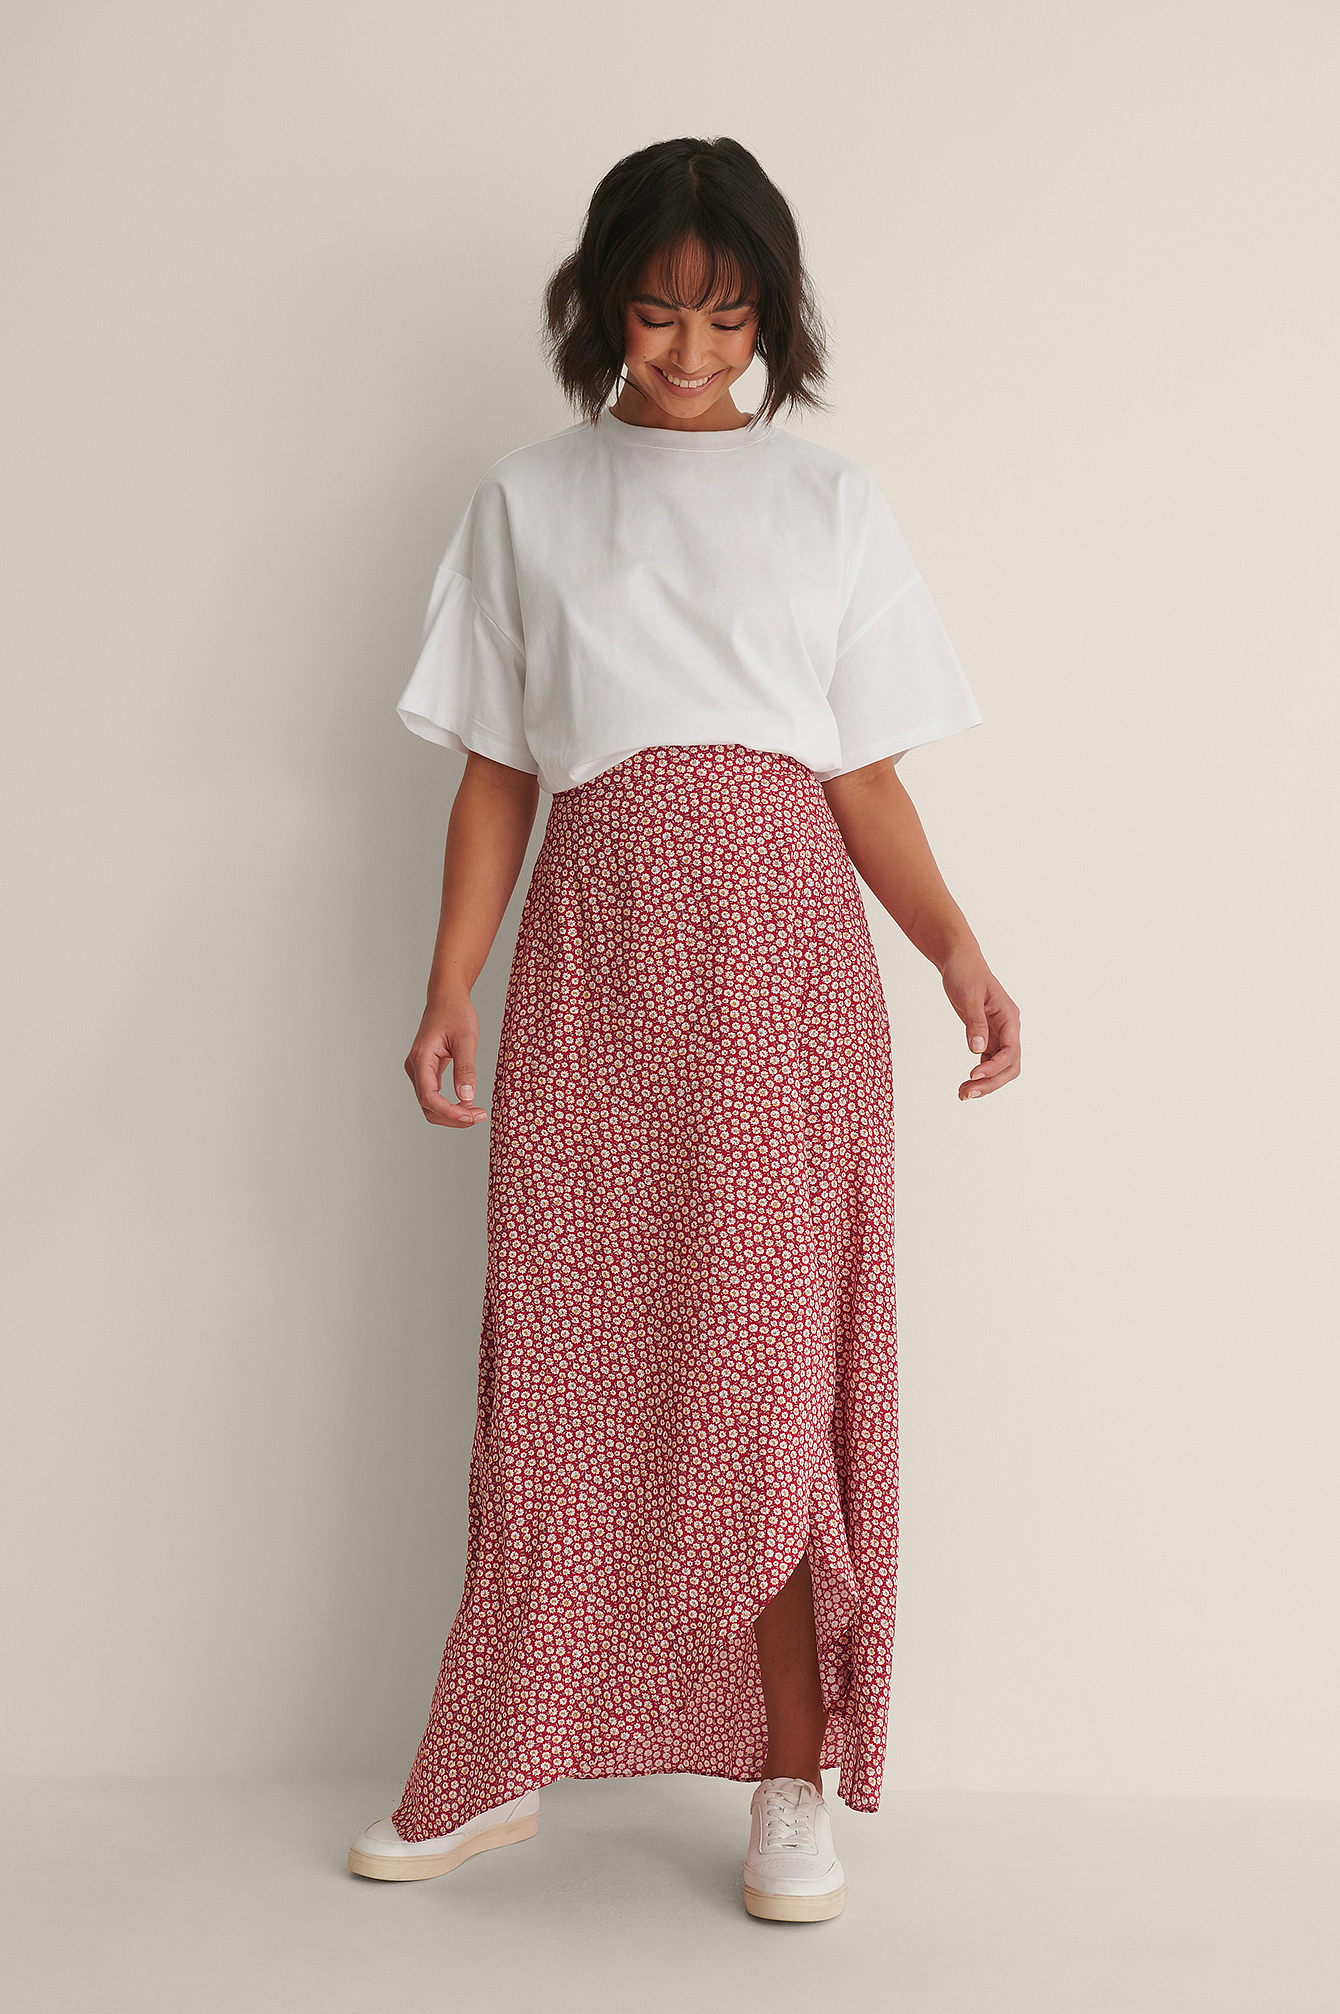 Overlap Printed Maxi Skirt Outfit.